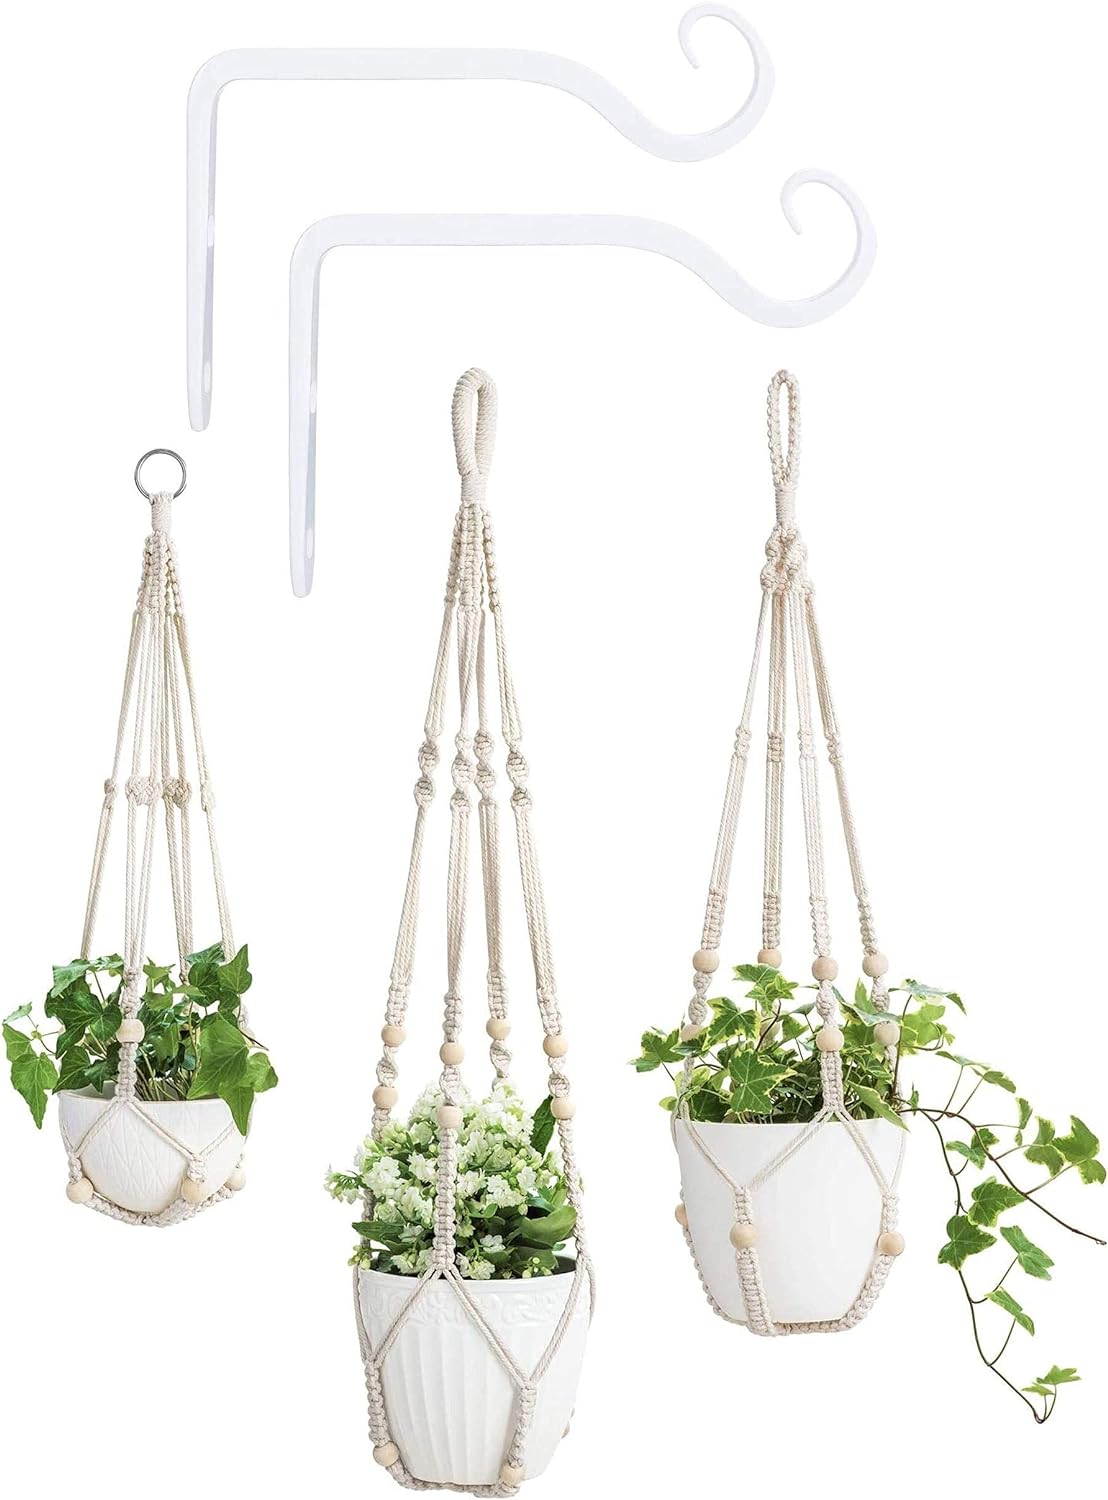 Mkono 3 Pack Macrame Plant Hangers and 2 Pack Wall Hook Hanging Plant Bracket, Flower Pot Holder Cotton Rope with Beads No Tassels, 23''/29''/35''